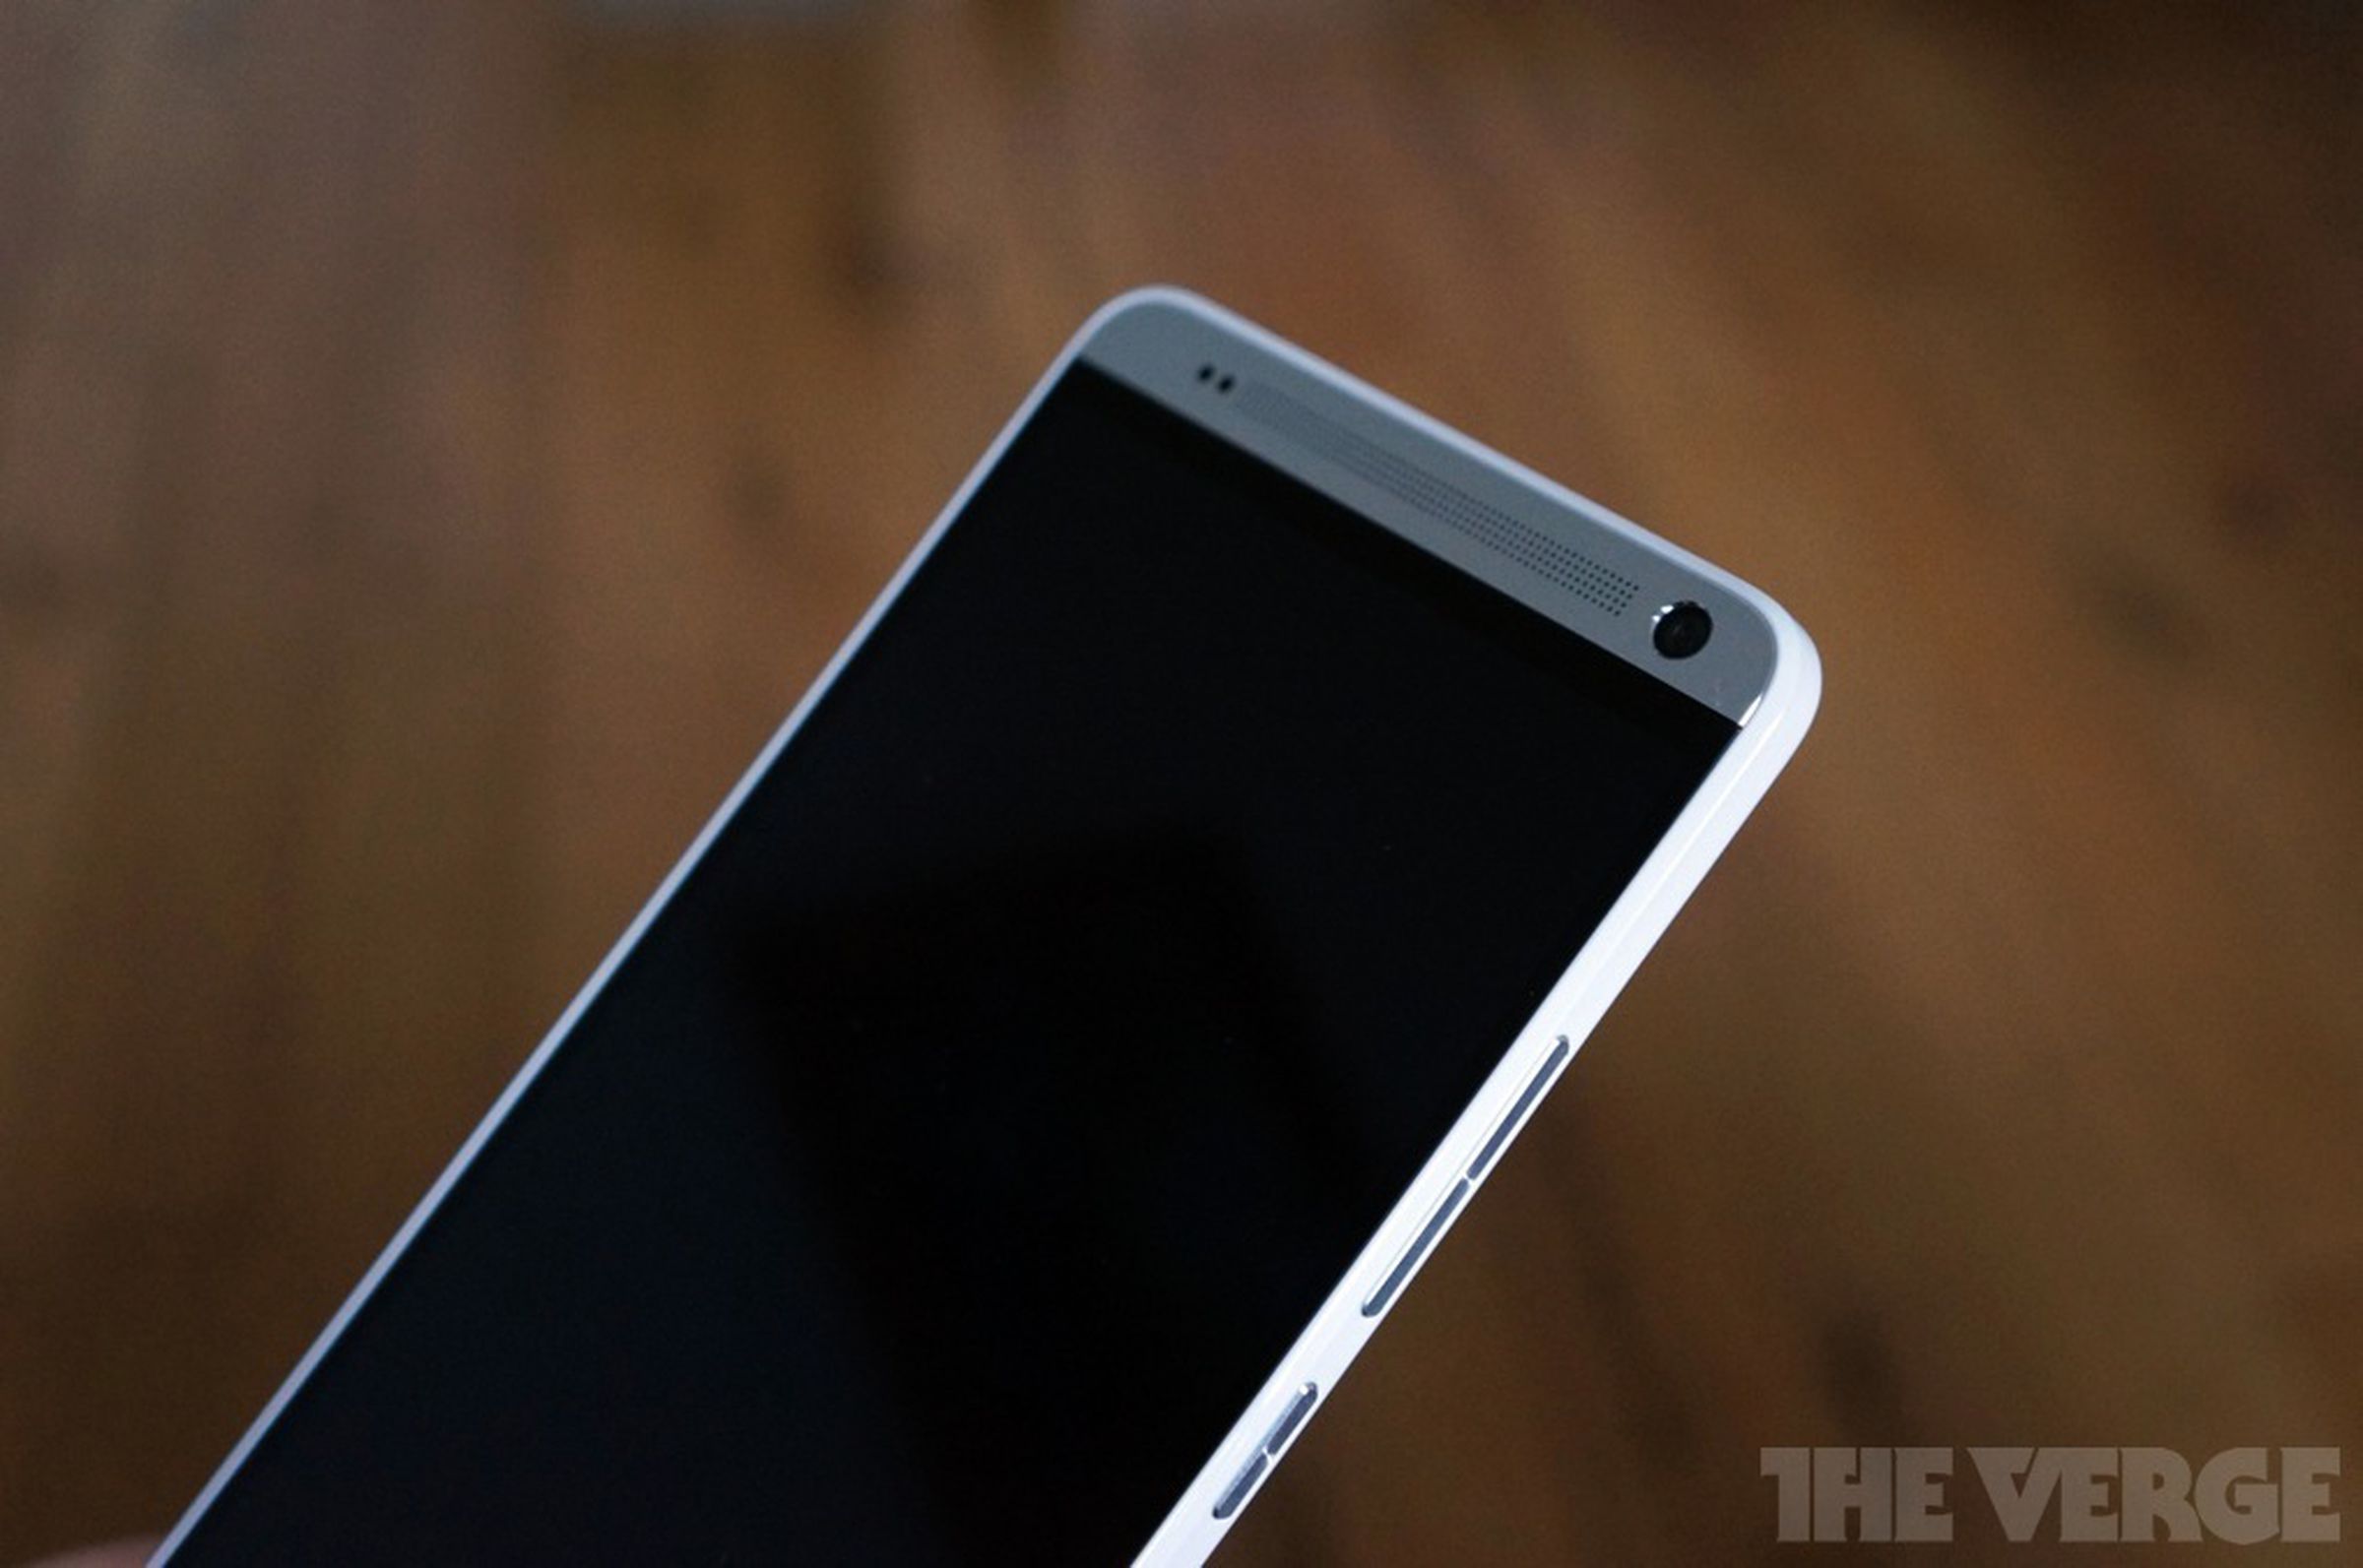 HTC One max hands-on gallery